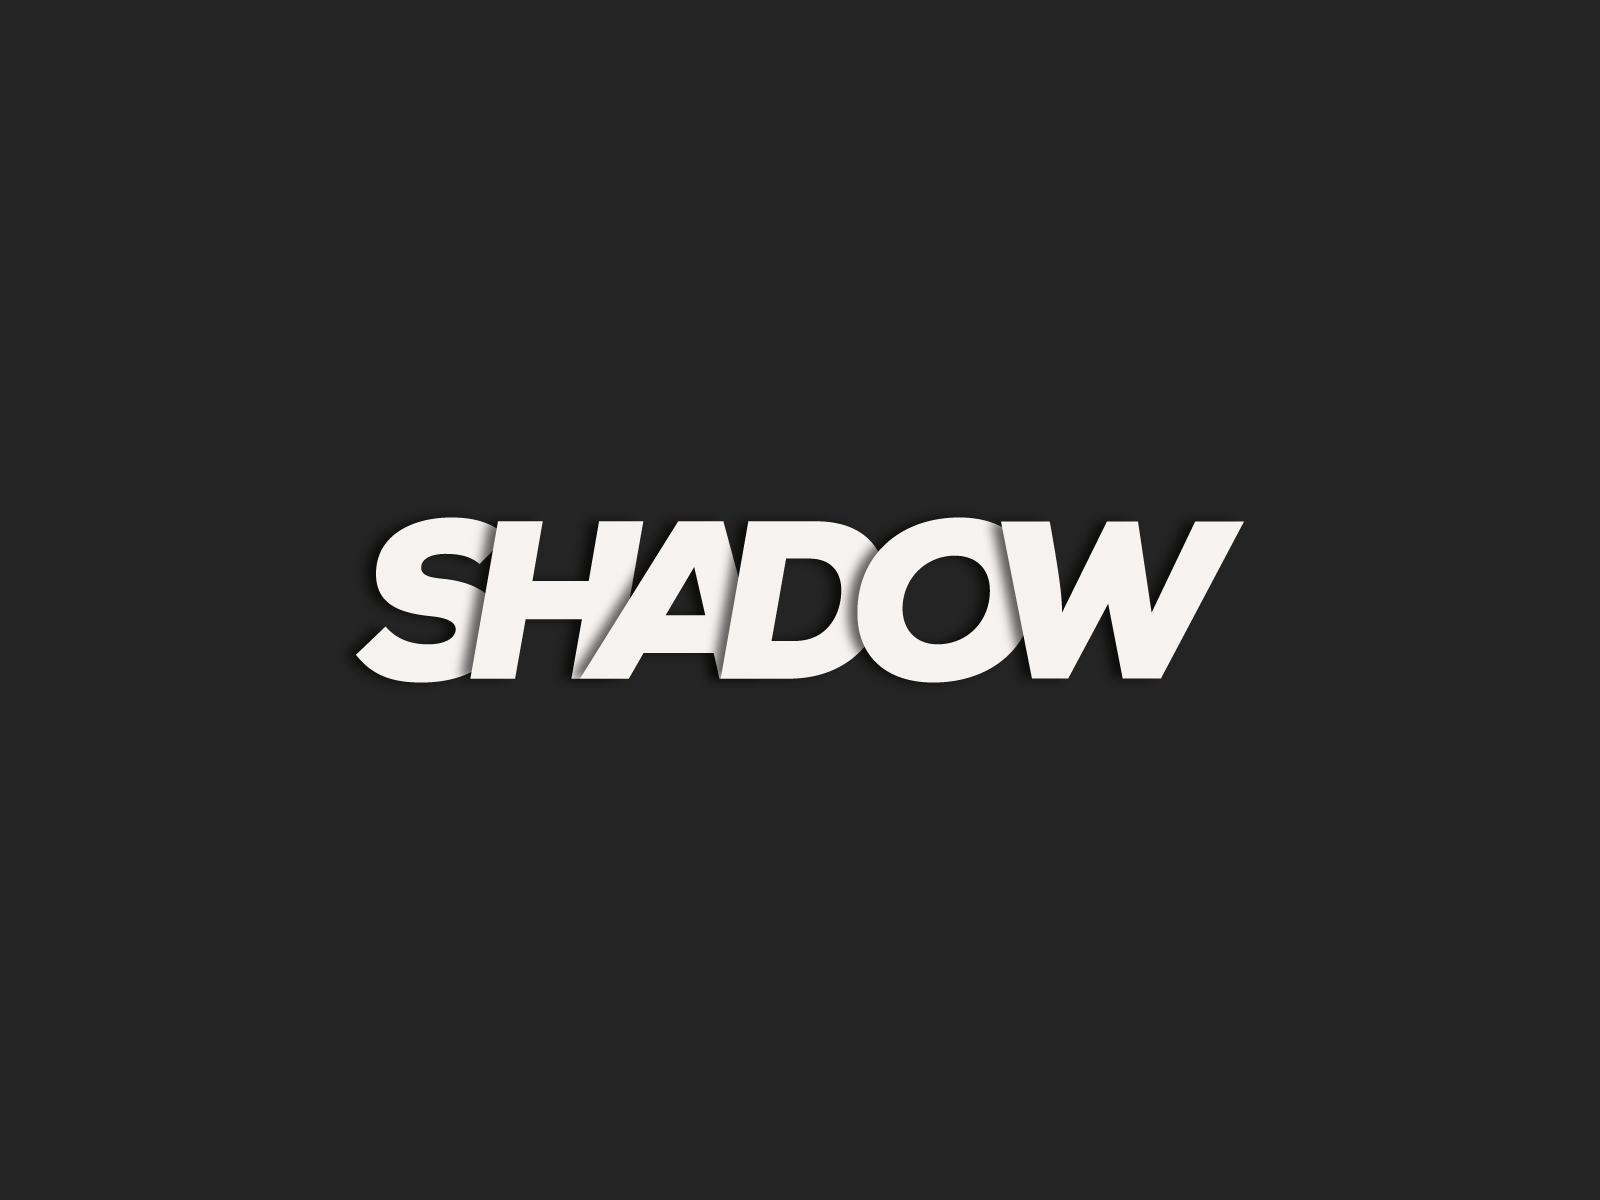 shadow by shakhawat hossin on Dribbble